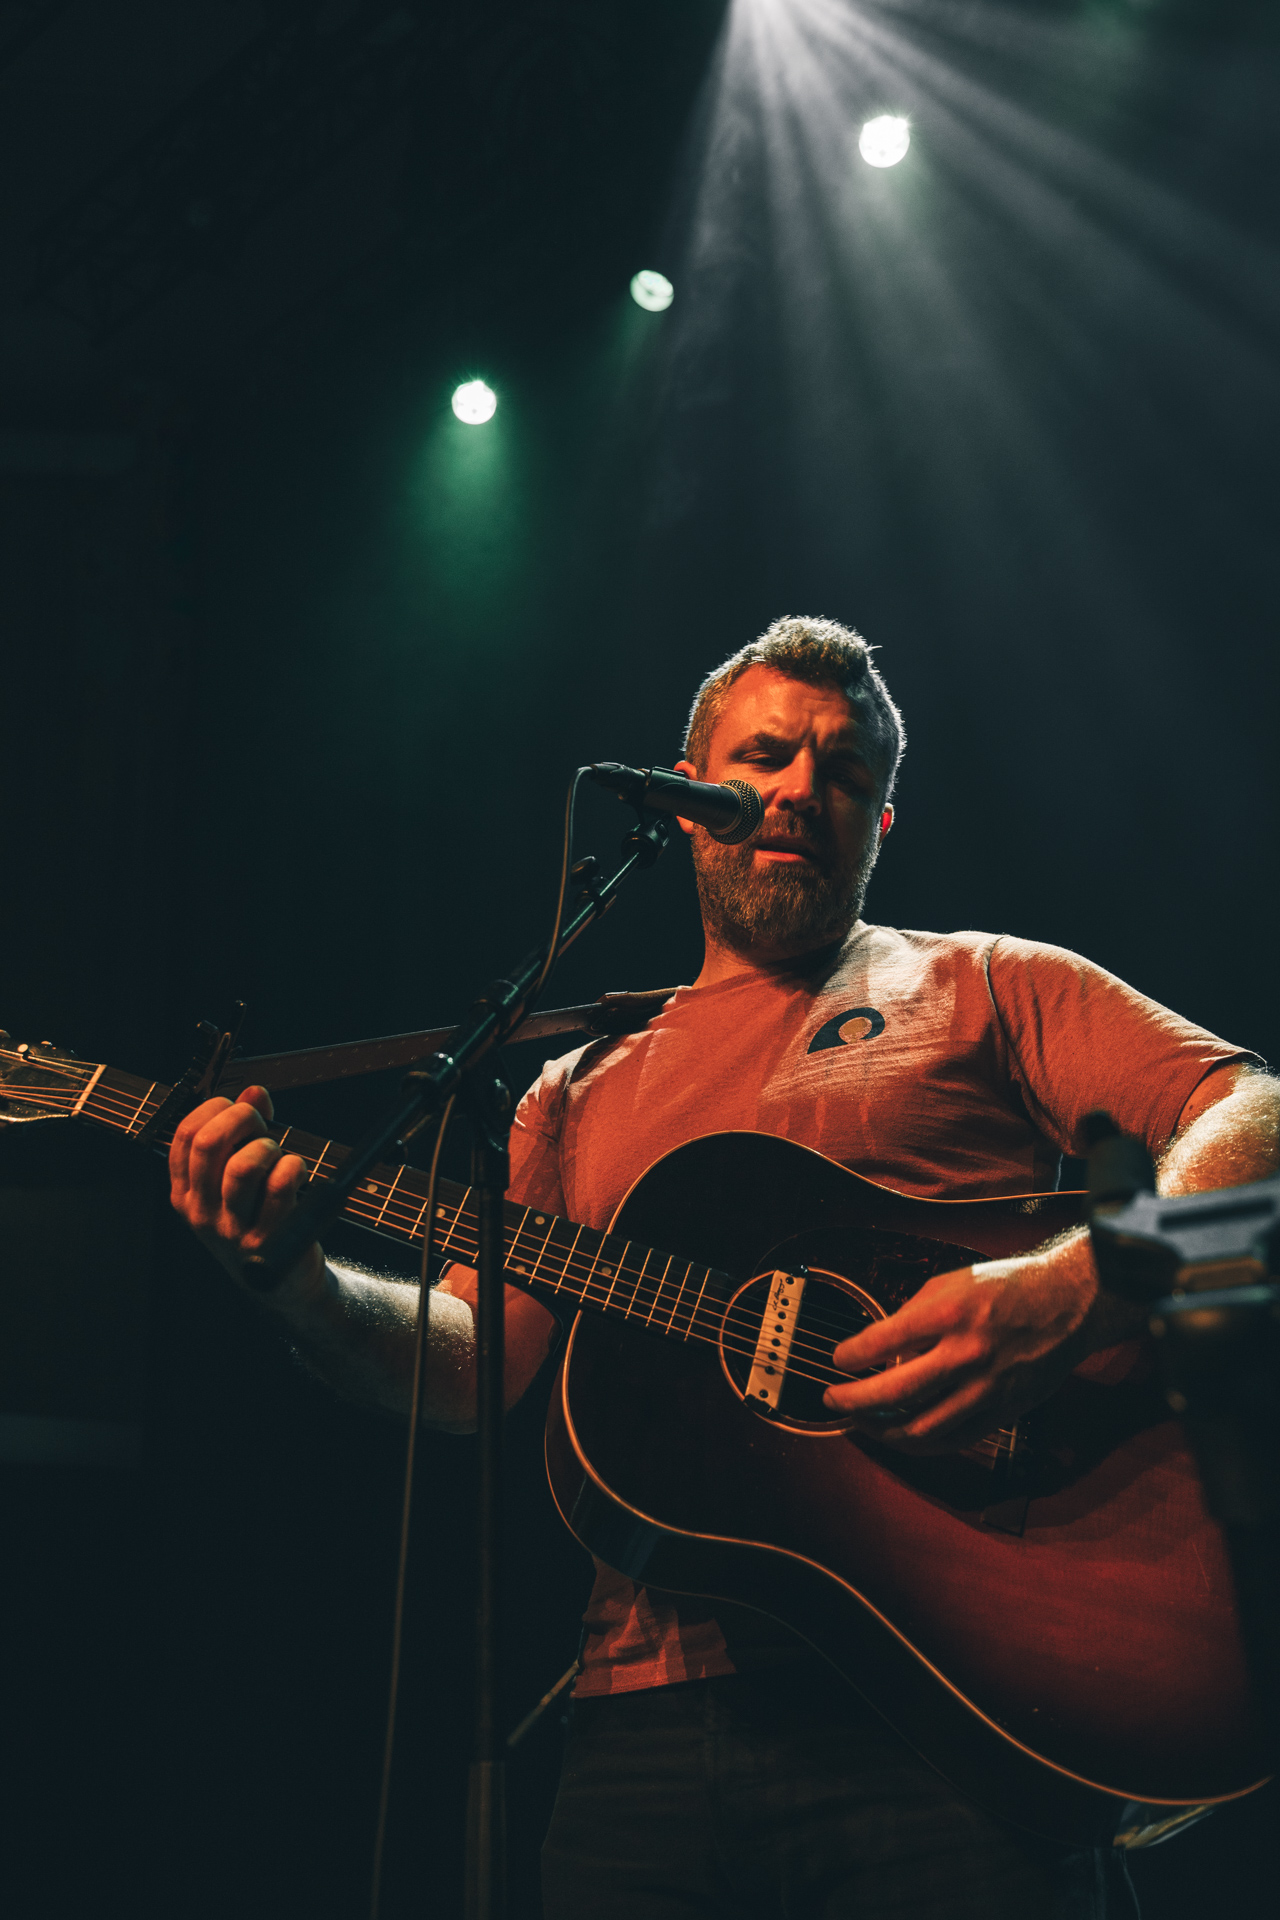 Mick Flannery Photo by Matthijs van der Ven for The Influences 5151